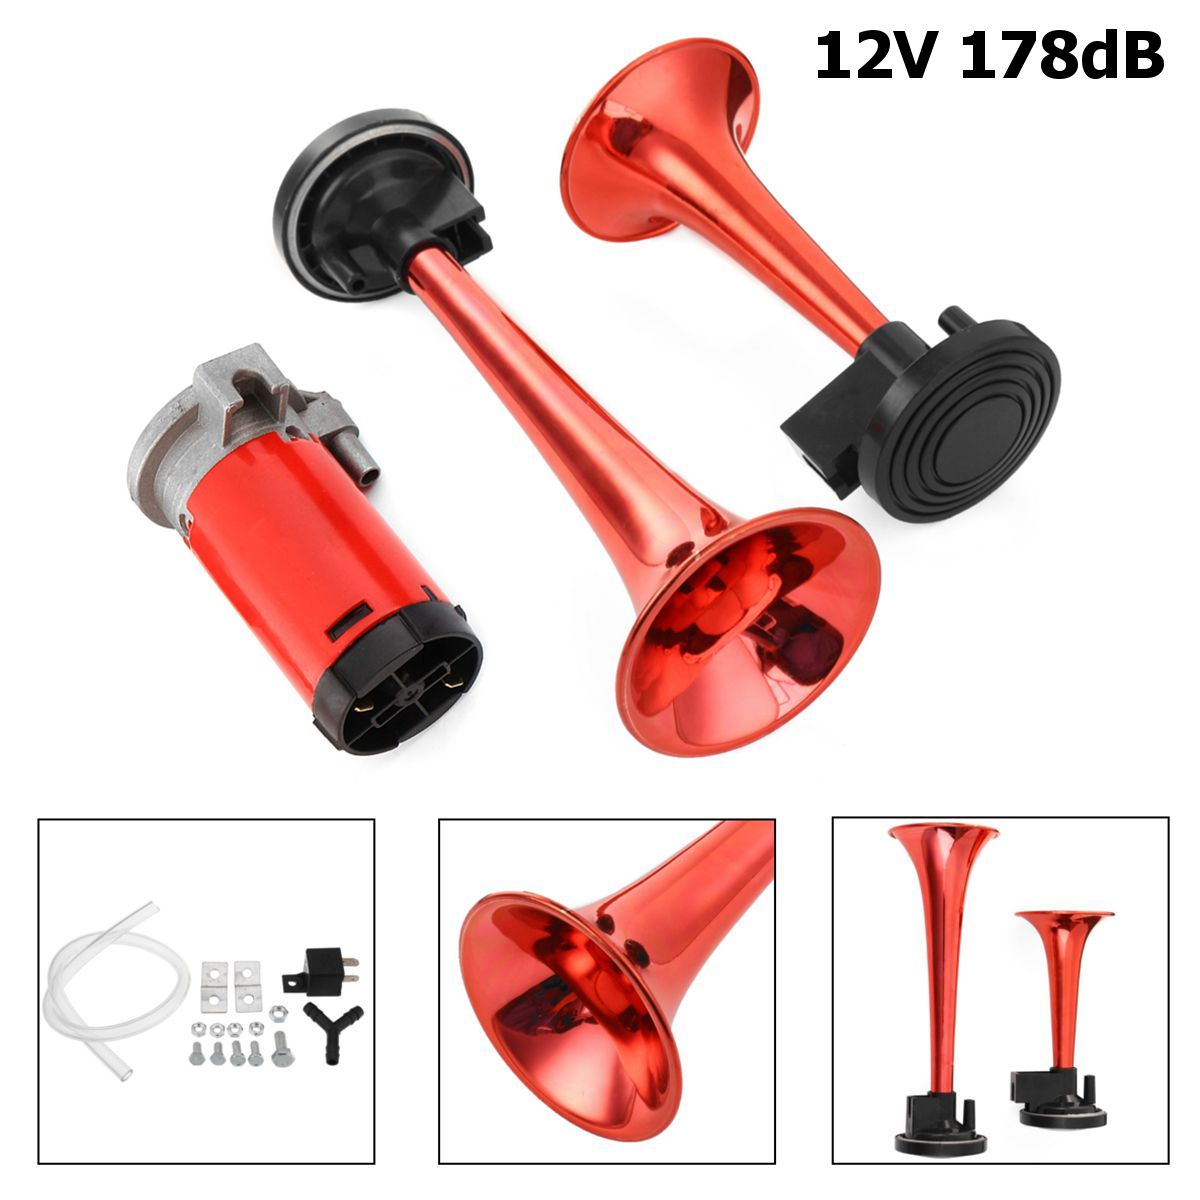 Orange Red 12V 178DB Air Horn Dual Trumpet Ultra Loud Universal For Train Trailer Truck Motorcycle